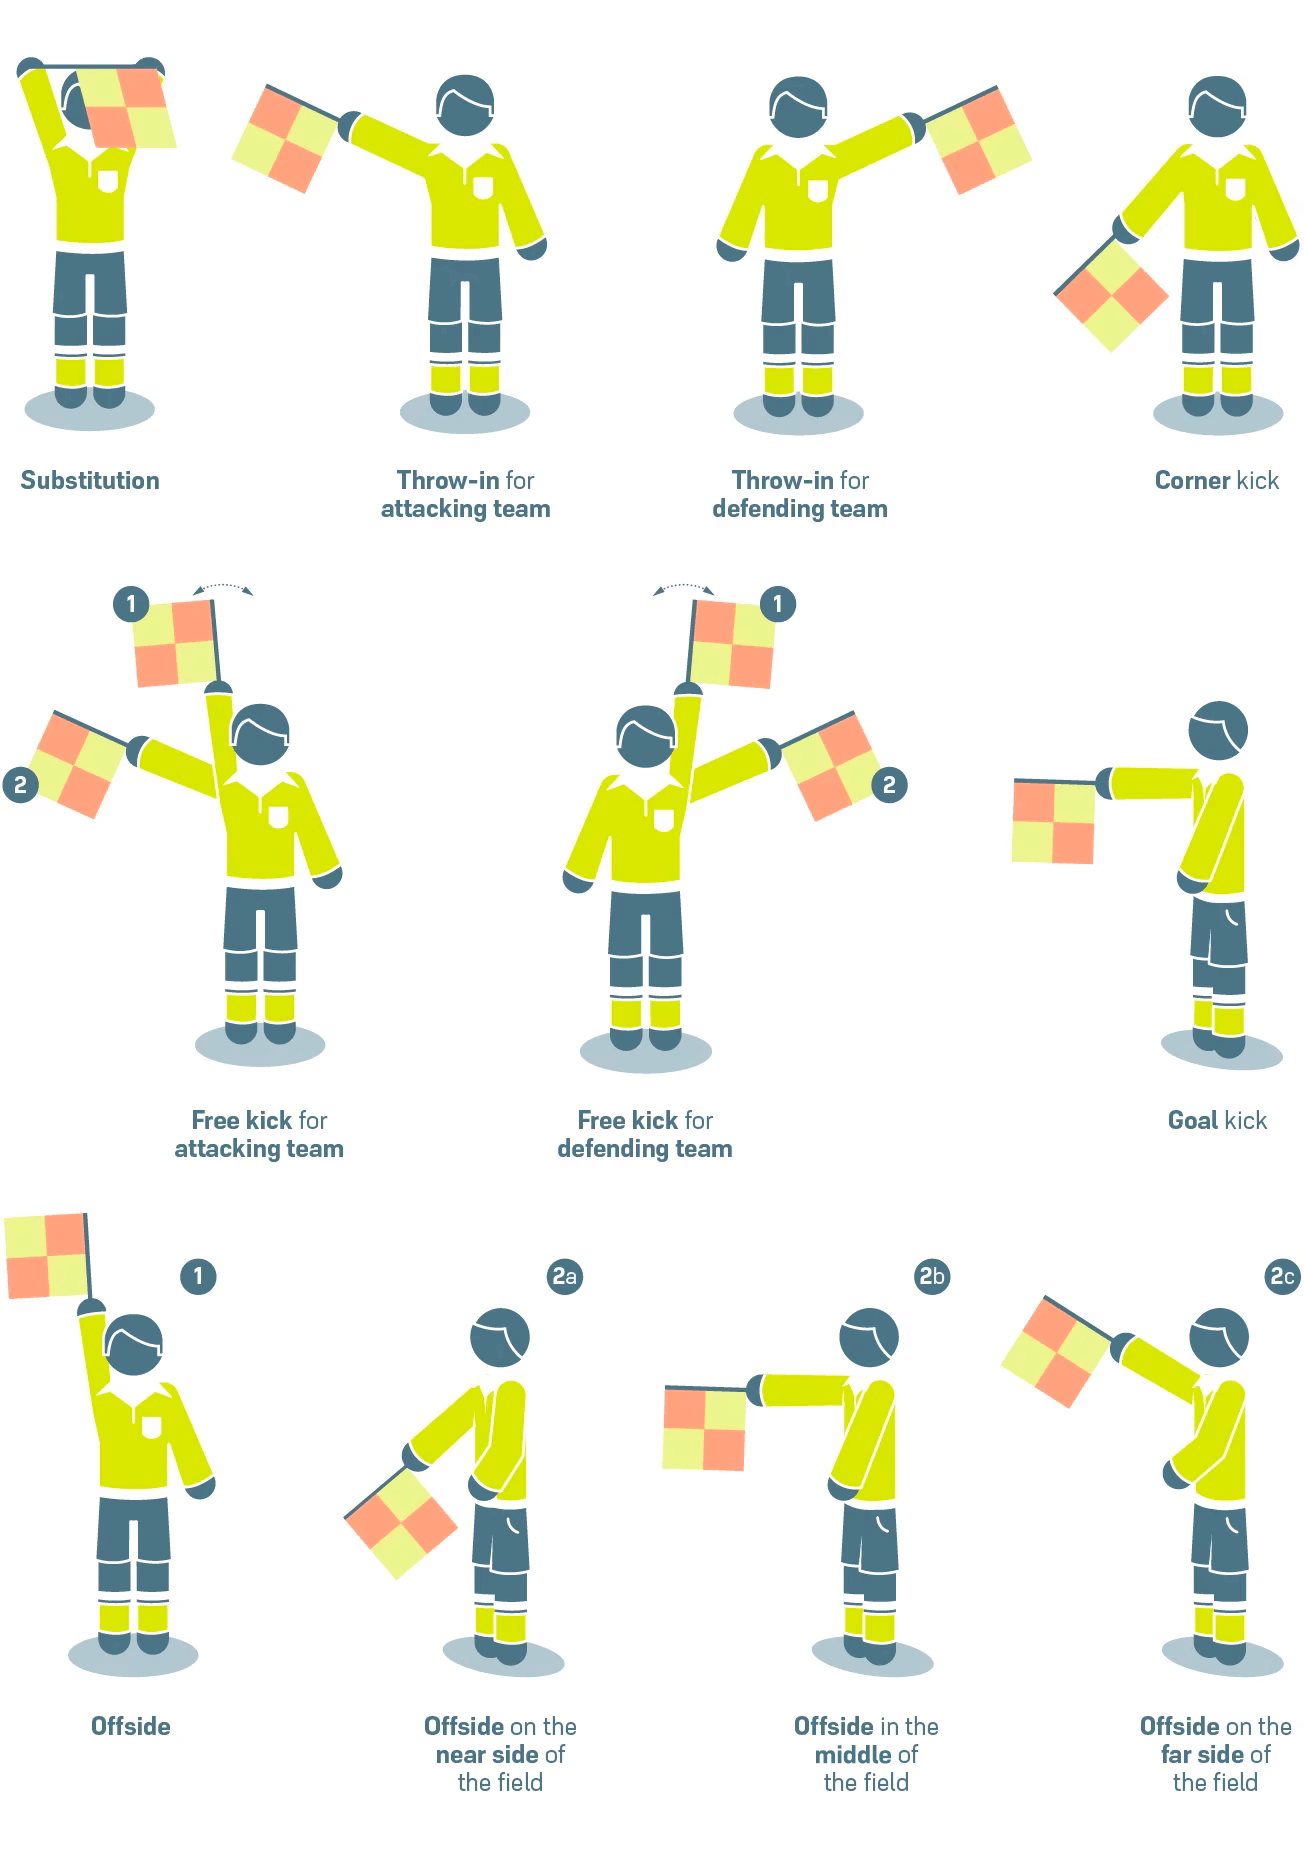 1640095024-the-other-match-officials-assistant-referee-signals-d.png